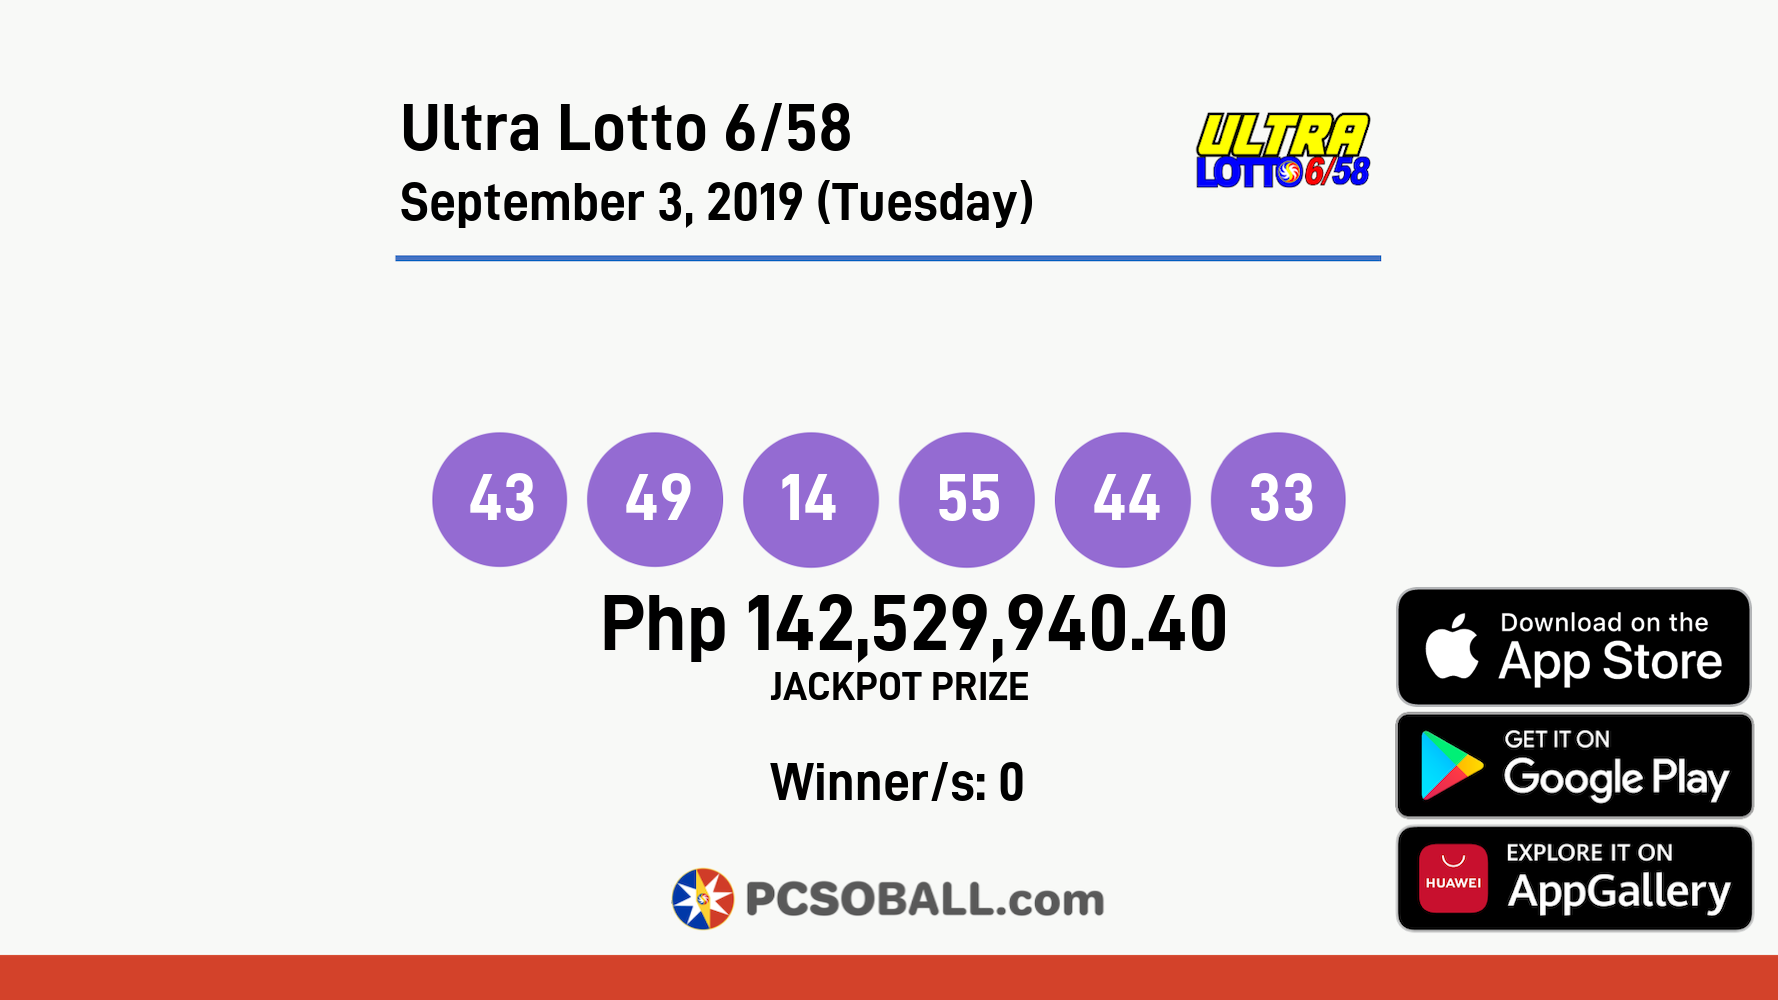 Ultra Lotto 6/58 September 3, 2019 (Tuesday) Result